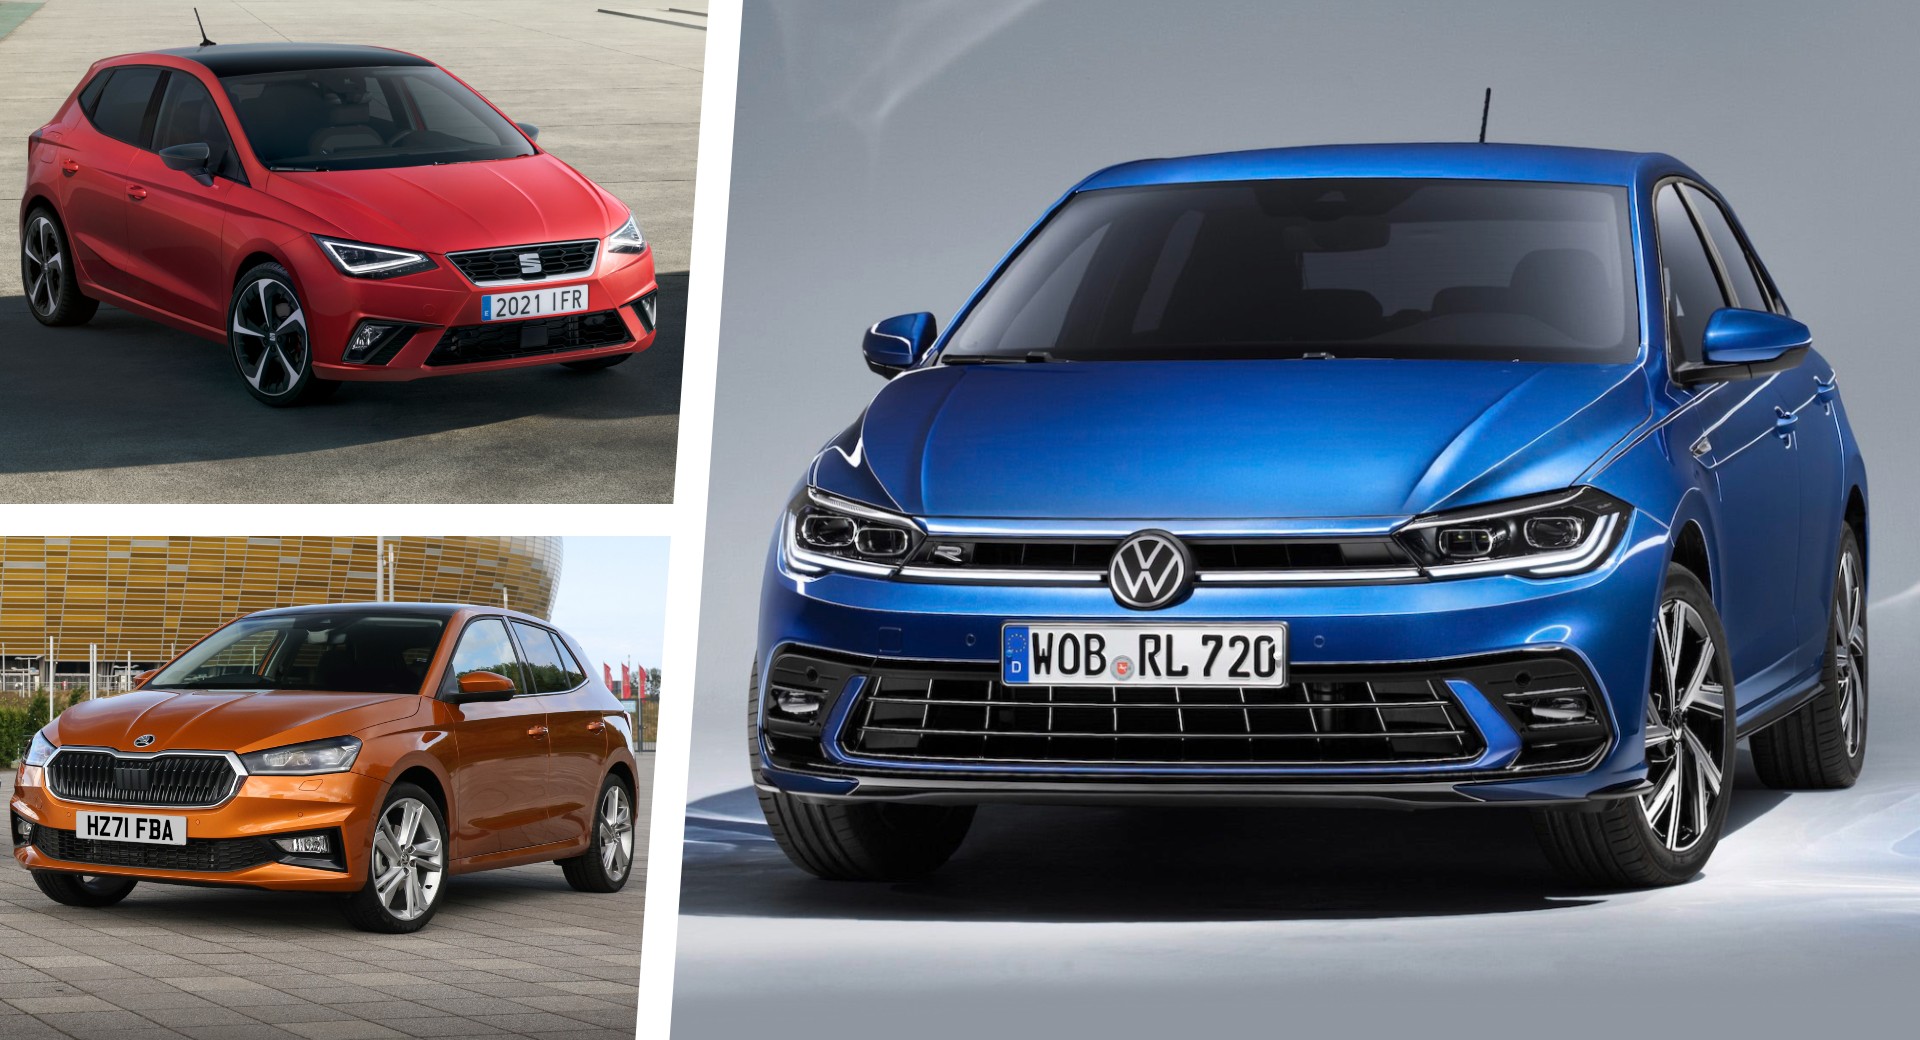 VW, Skoda, And Seat Models To Share More Parts Under Their